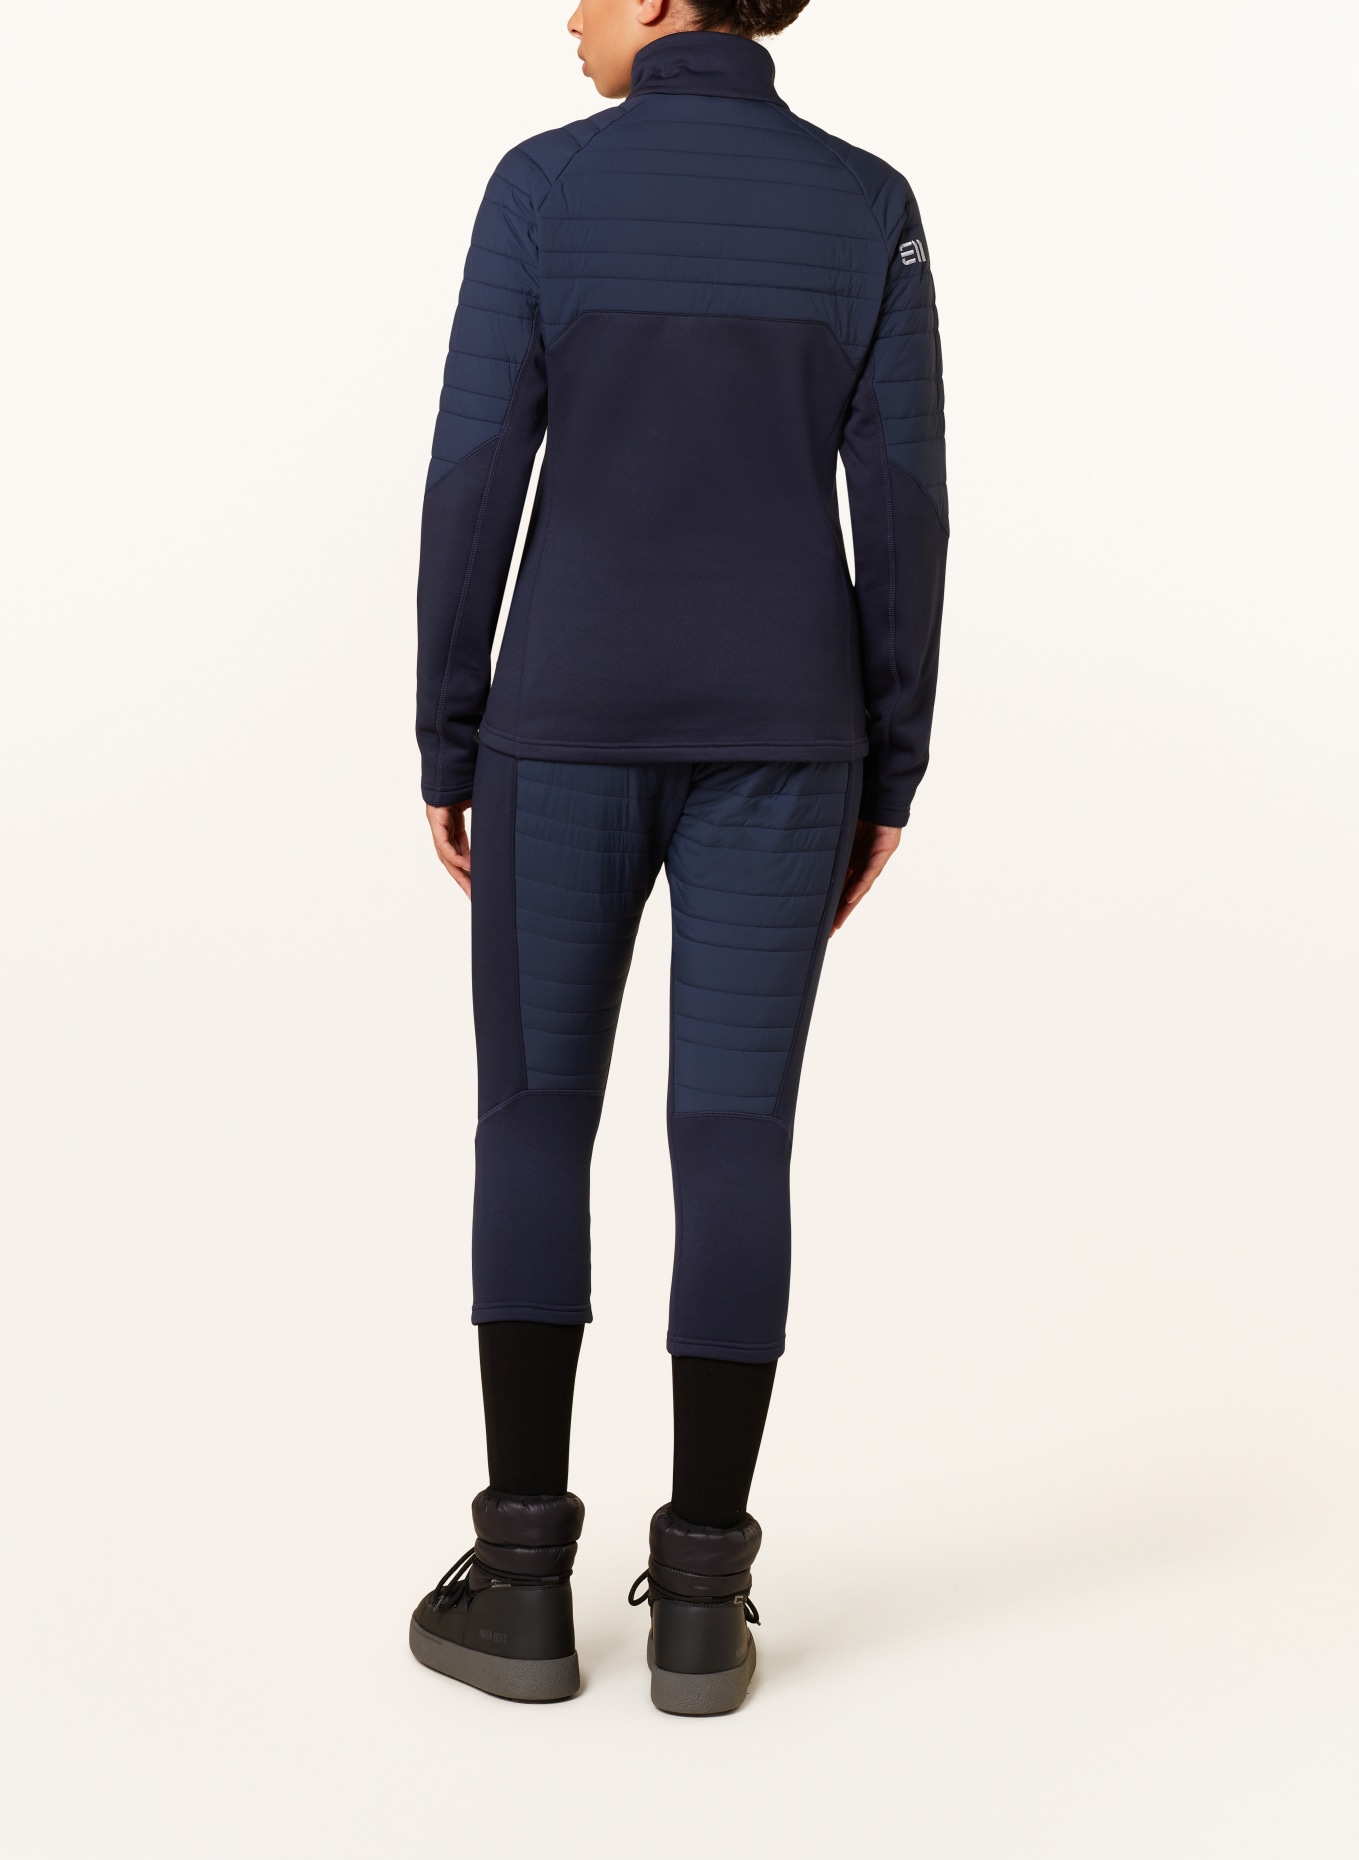 state of elevenate Mid-layer jacket FUSION, Color: DARK BLUE (Image 3)